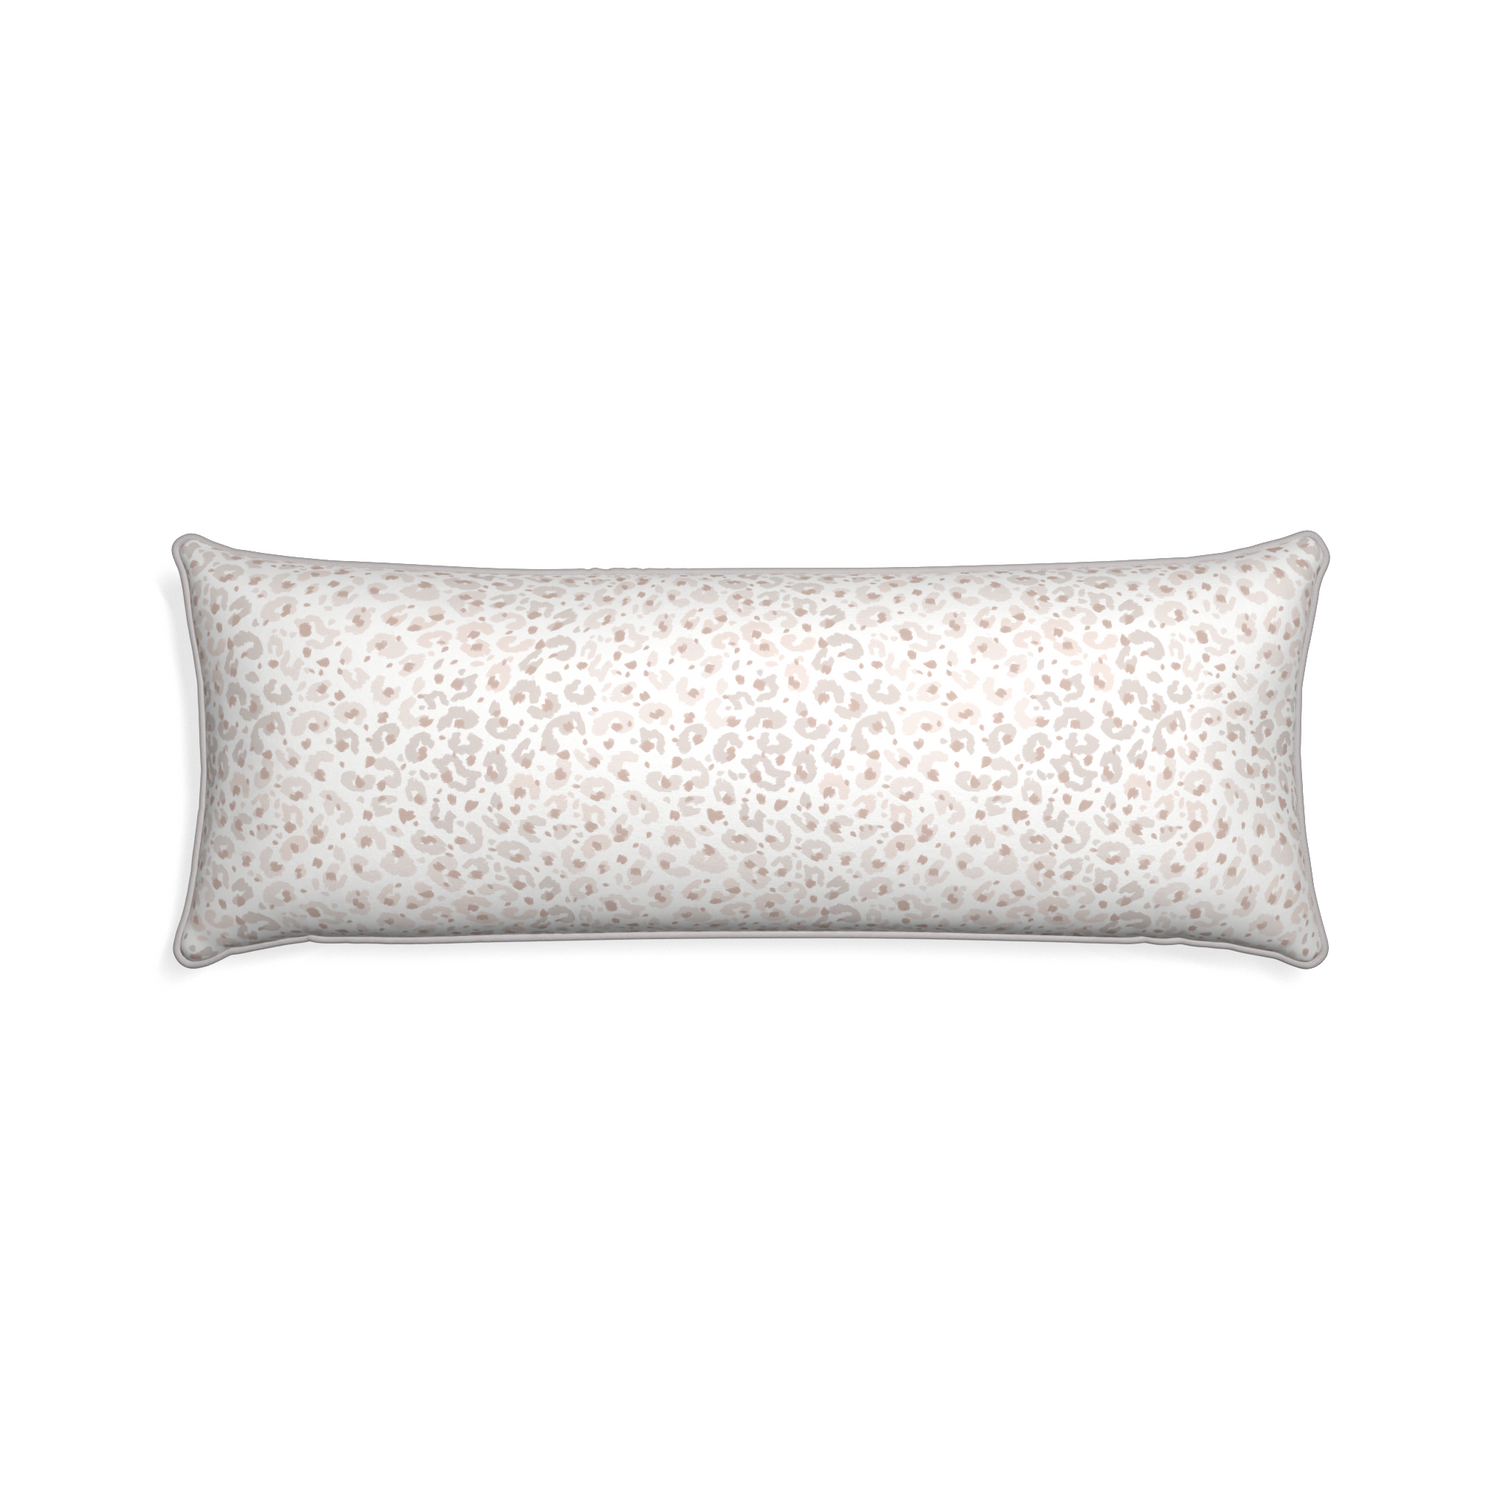 Xl-lumbar rosie custom beige animal printpillow with pebble piping on white background